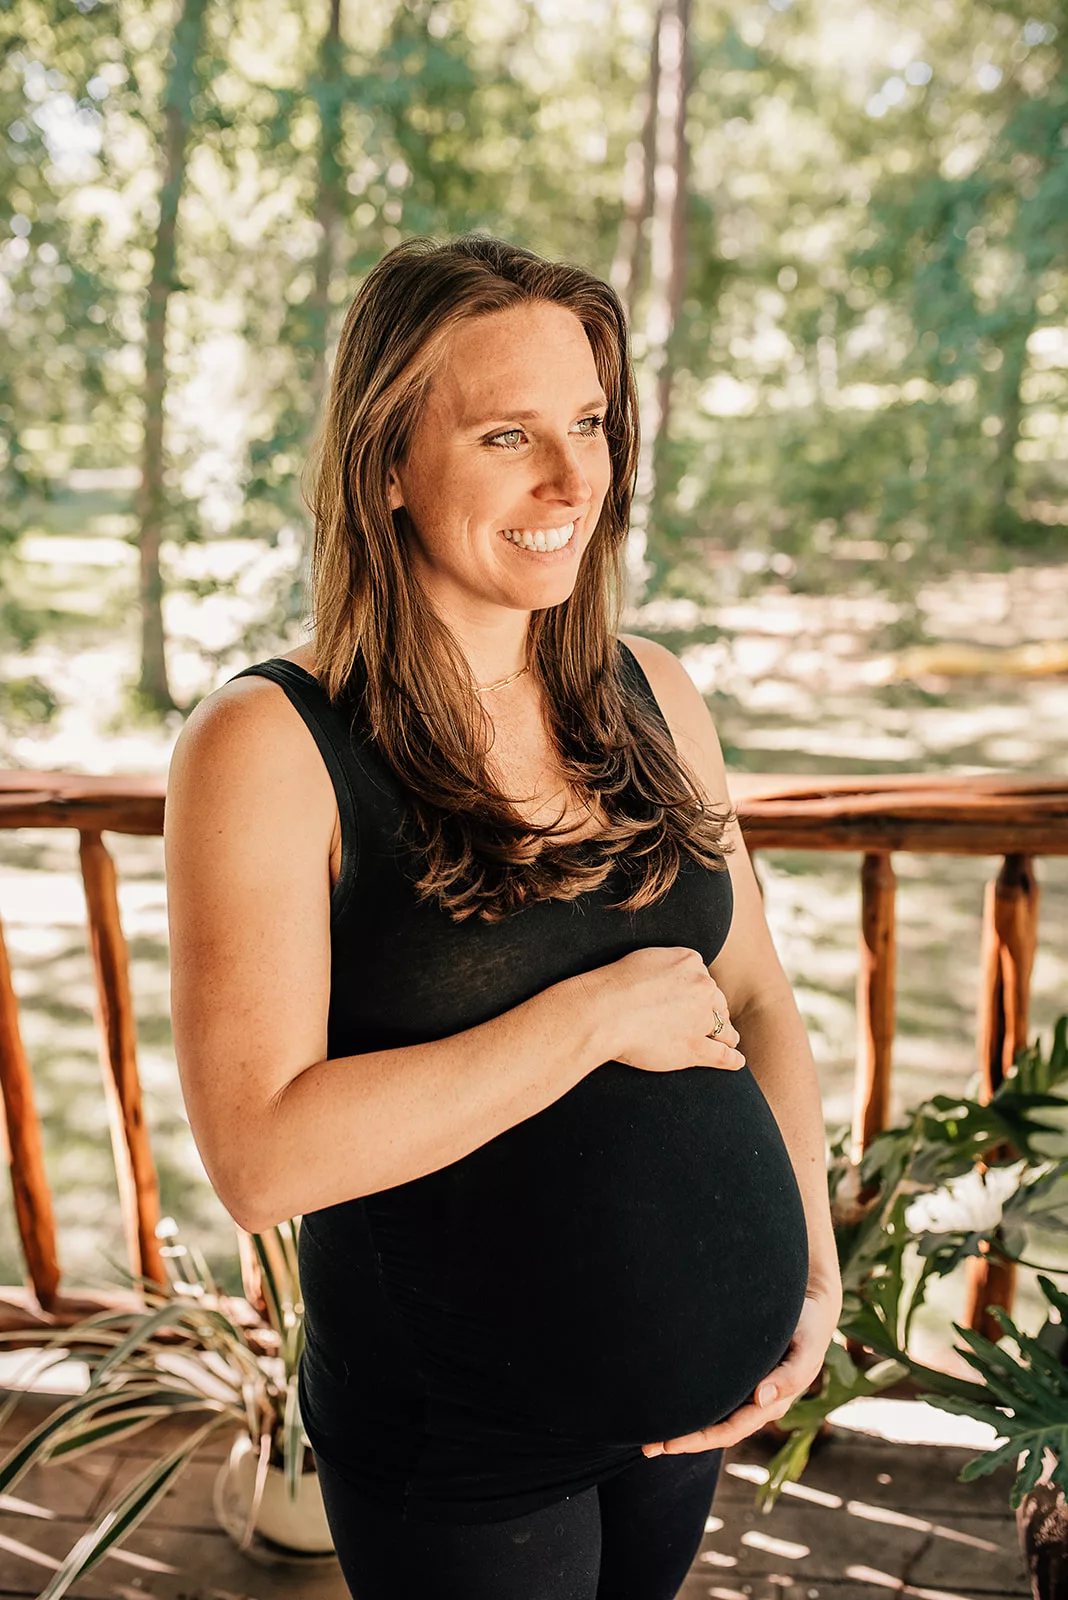 A mom to be stands on a wooden porch smiling in the sun and holding her bump in a black maternity shirt